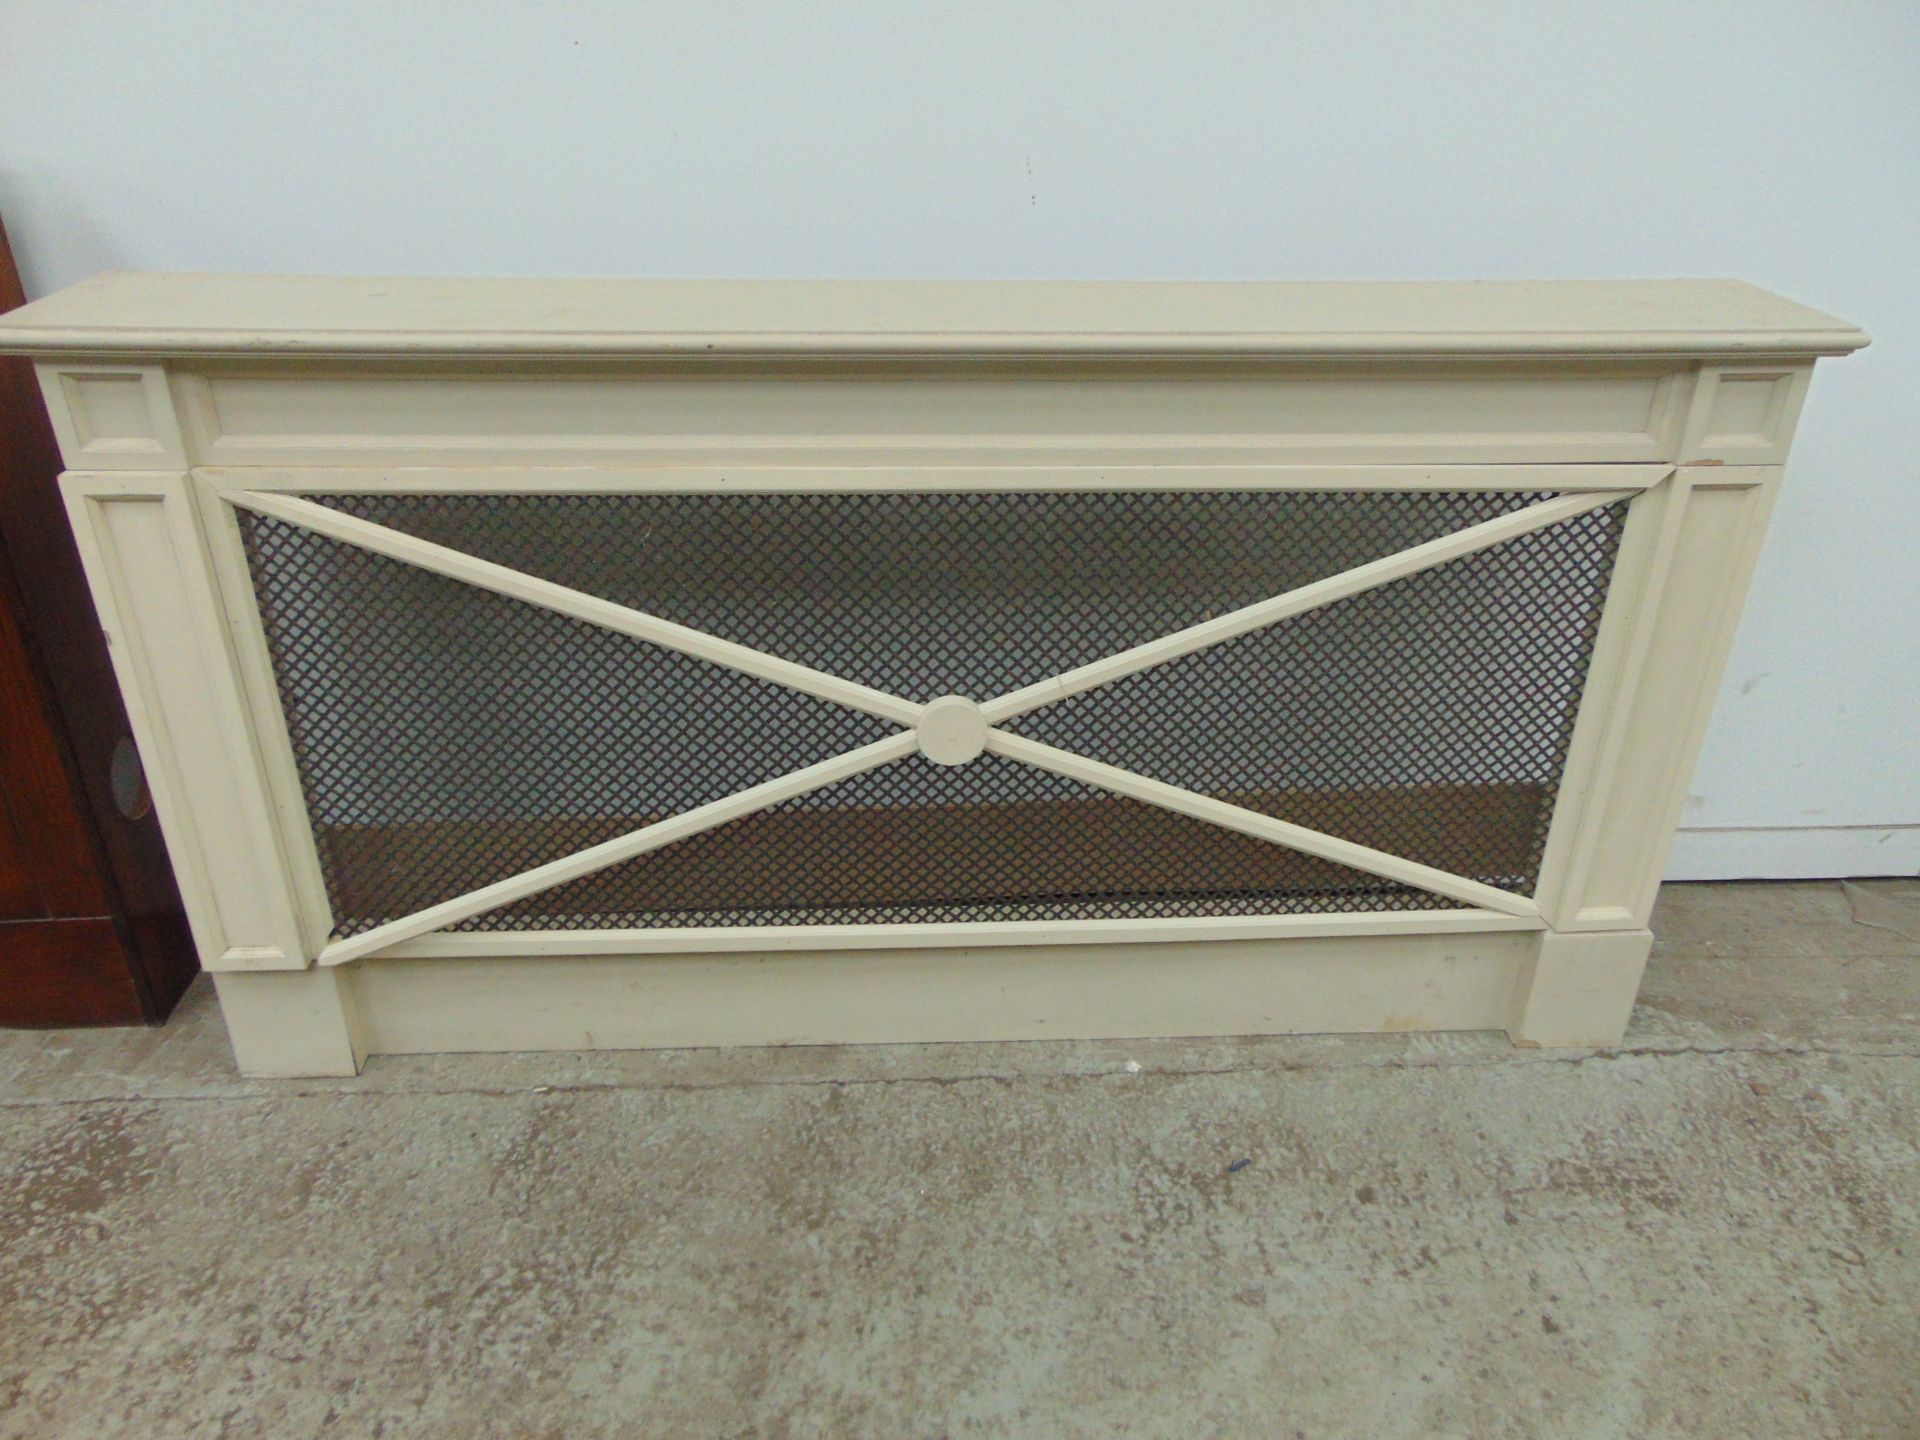 Large radiator cover in cream x1860 wide x980 high x 250mm deep